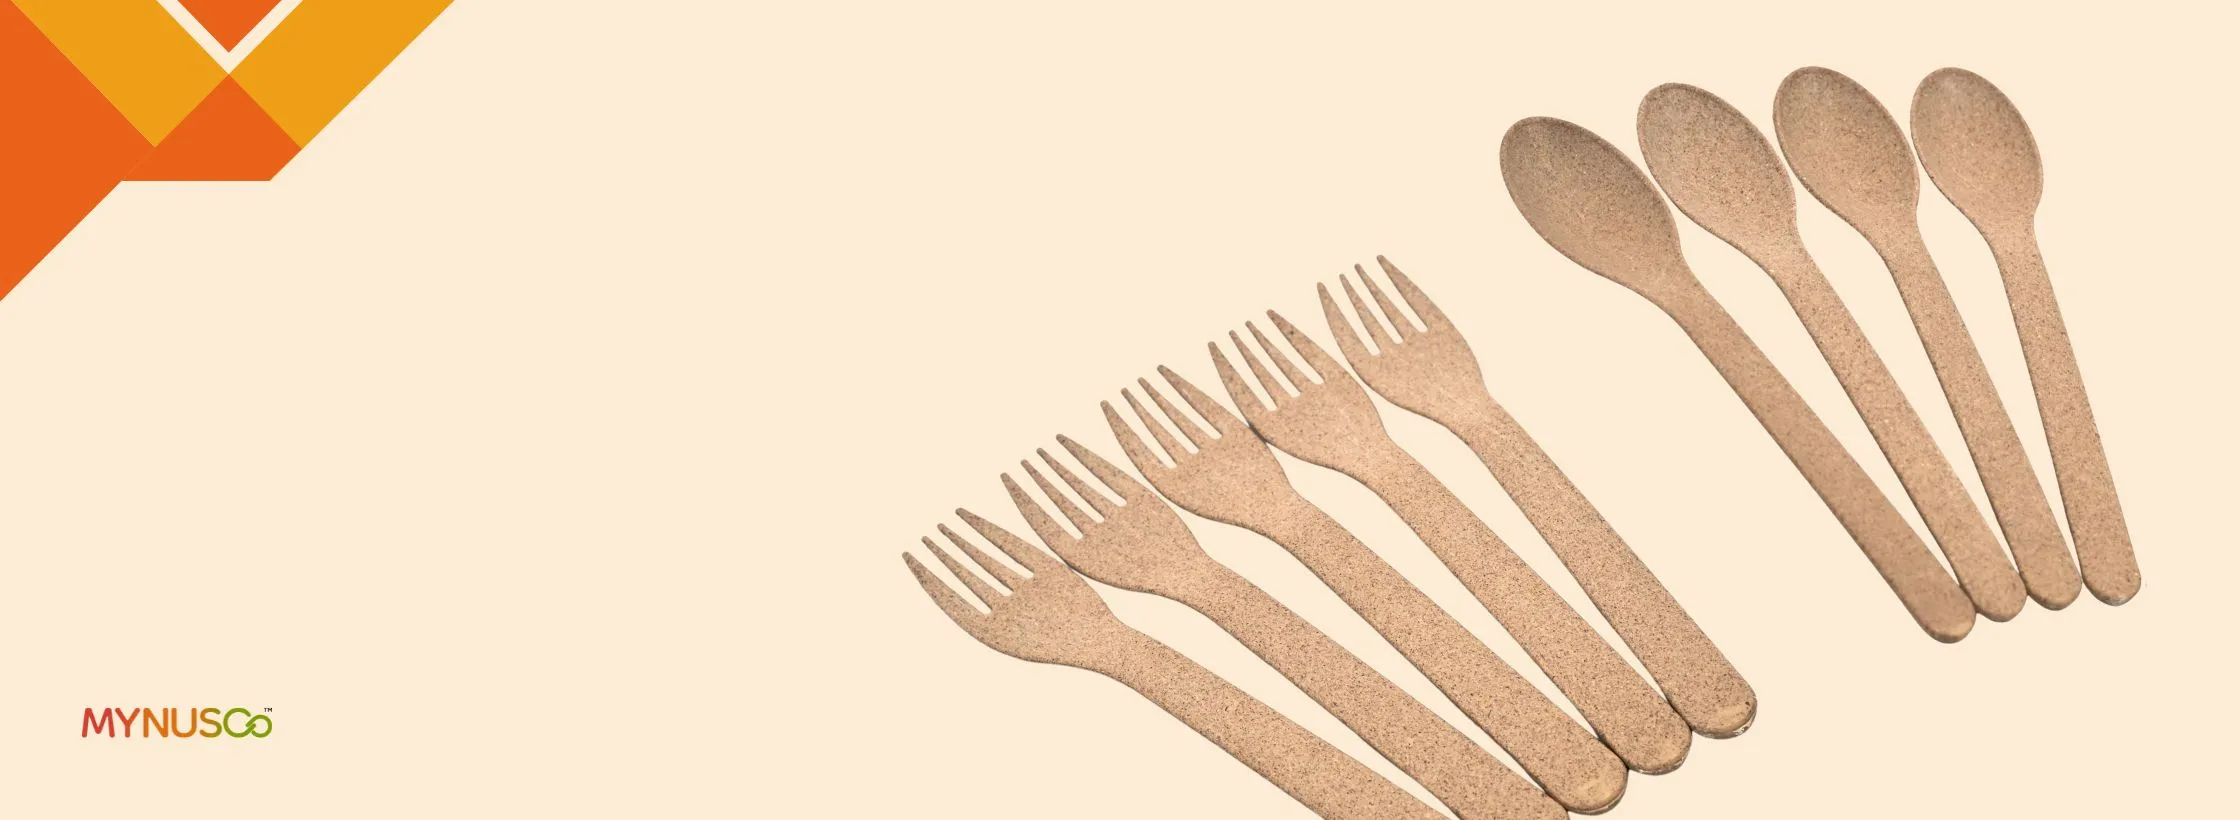 5 Alternatives to Plastic Cutlery You should know